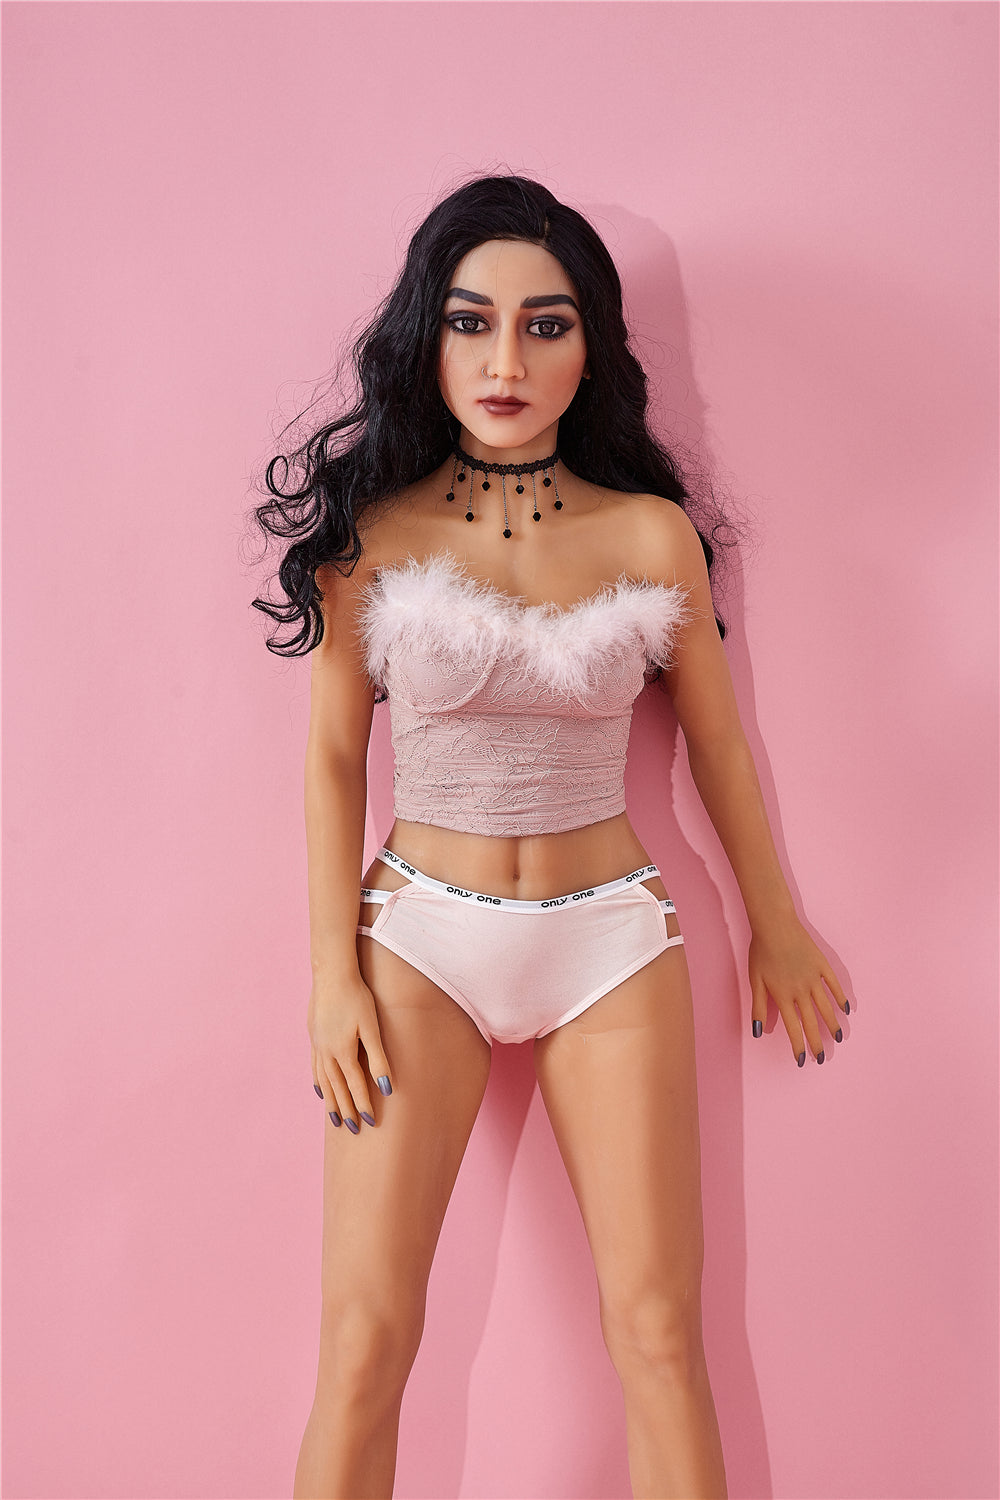 Irontech Doll 150 cm B TPE - Kaia | Buy Sex Dolls at DOLLS ACTUALLY